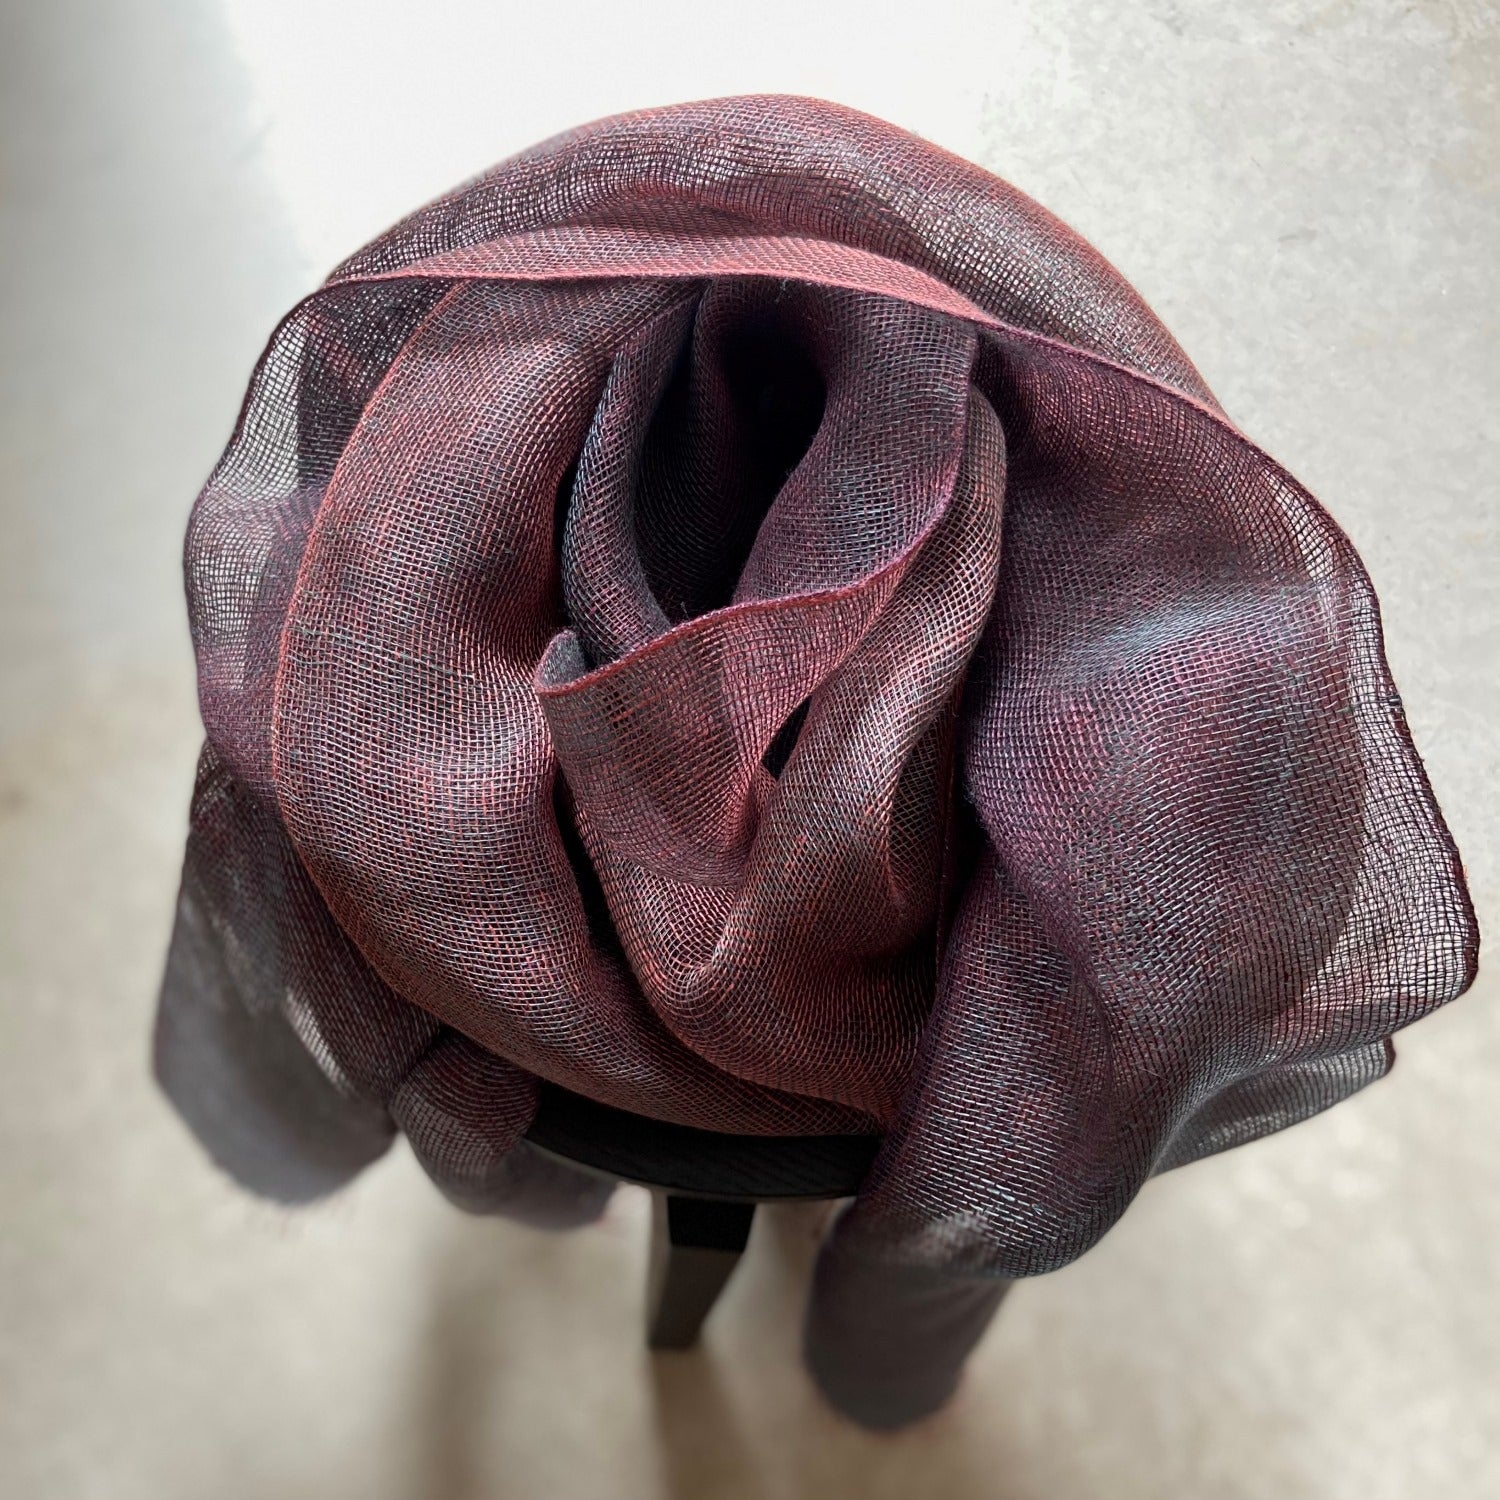 Double layer linen scarf in bordo 50x200 cm with hand-twisted fringes